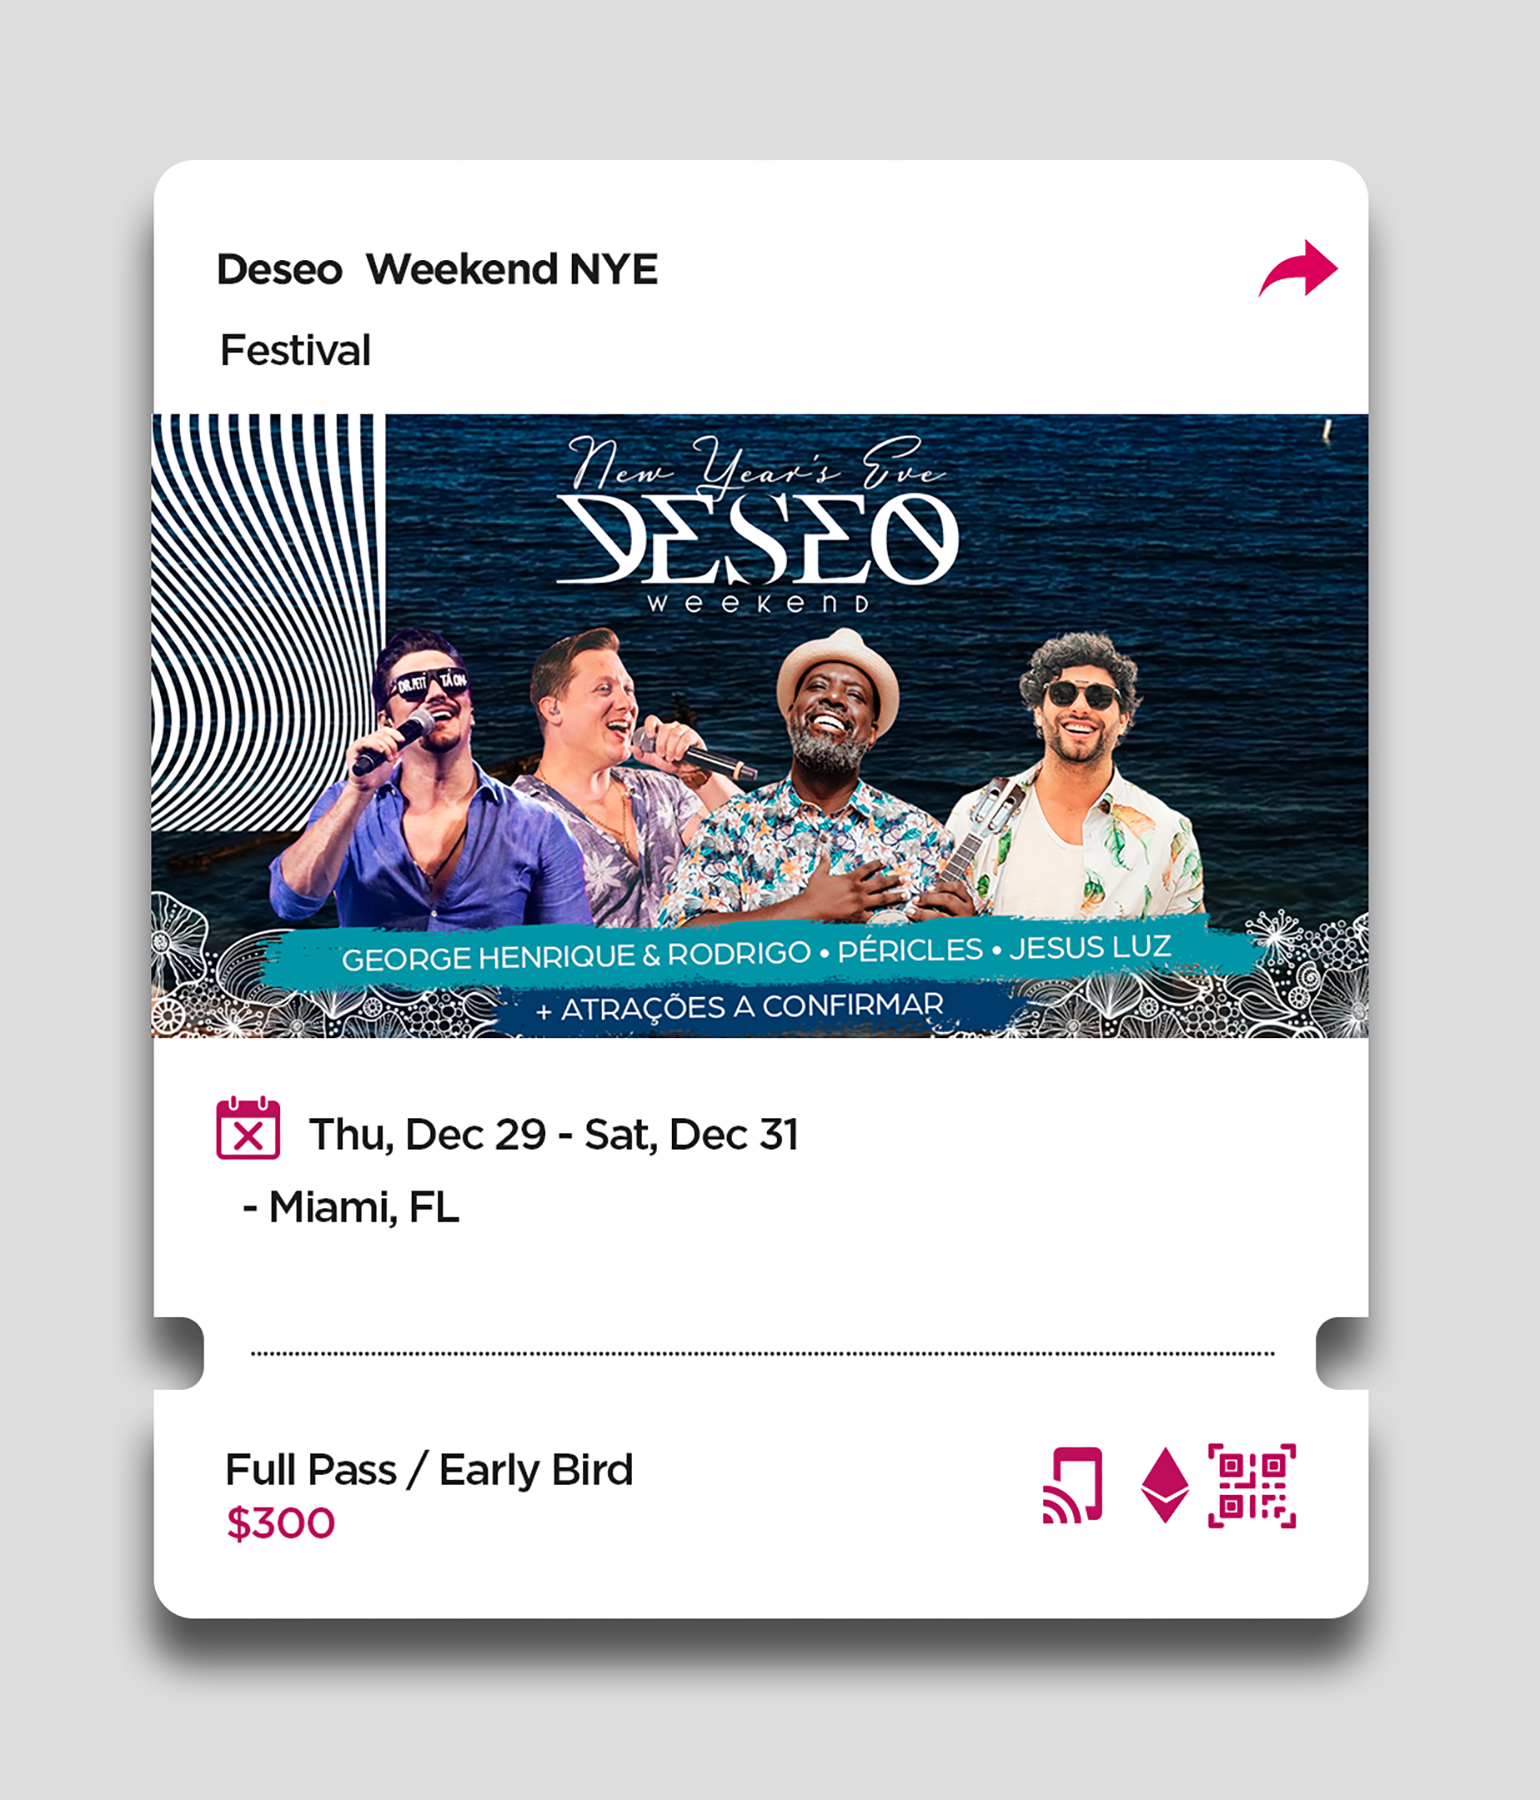 One of first GROOVOO NFT tickets now available on Groovooapp.com for the annual DESEO New Year's weekend mega-event in Florida.